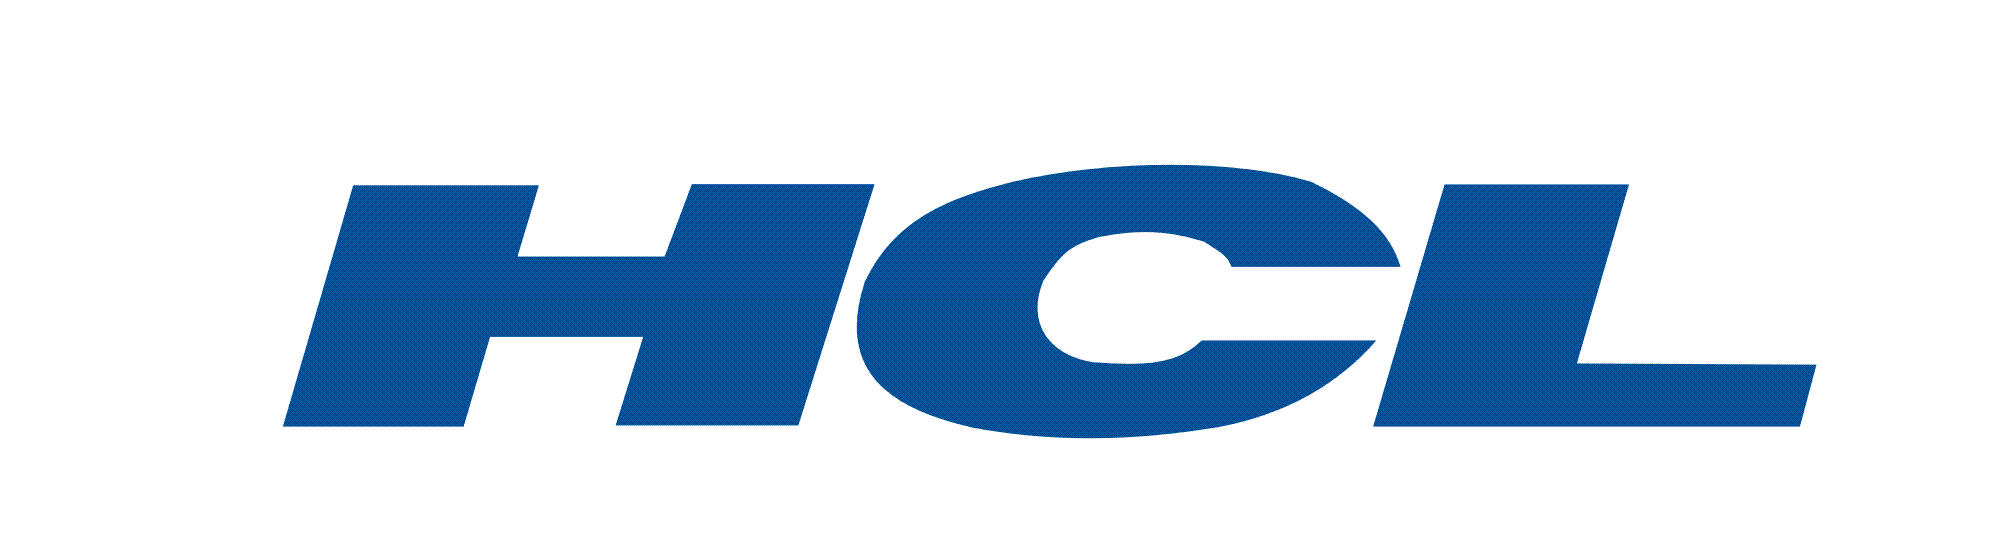 Hcl movers and packers photos images and wallpapers